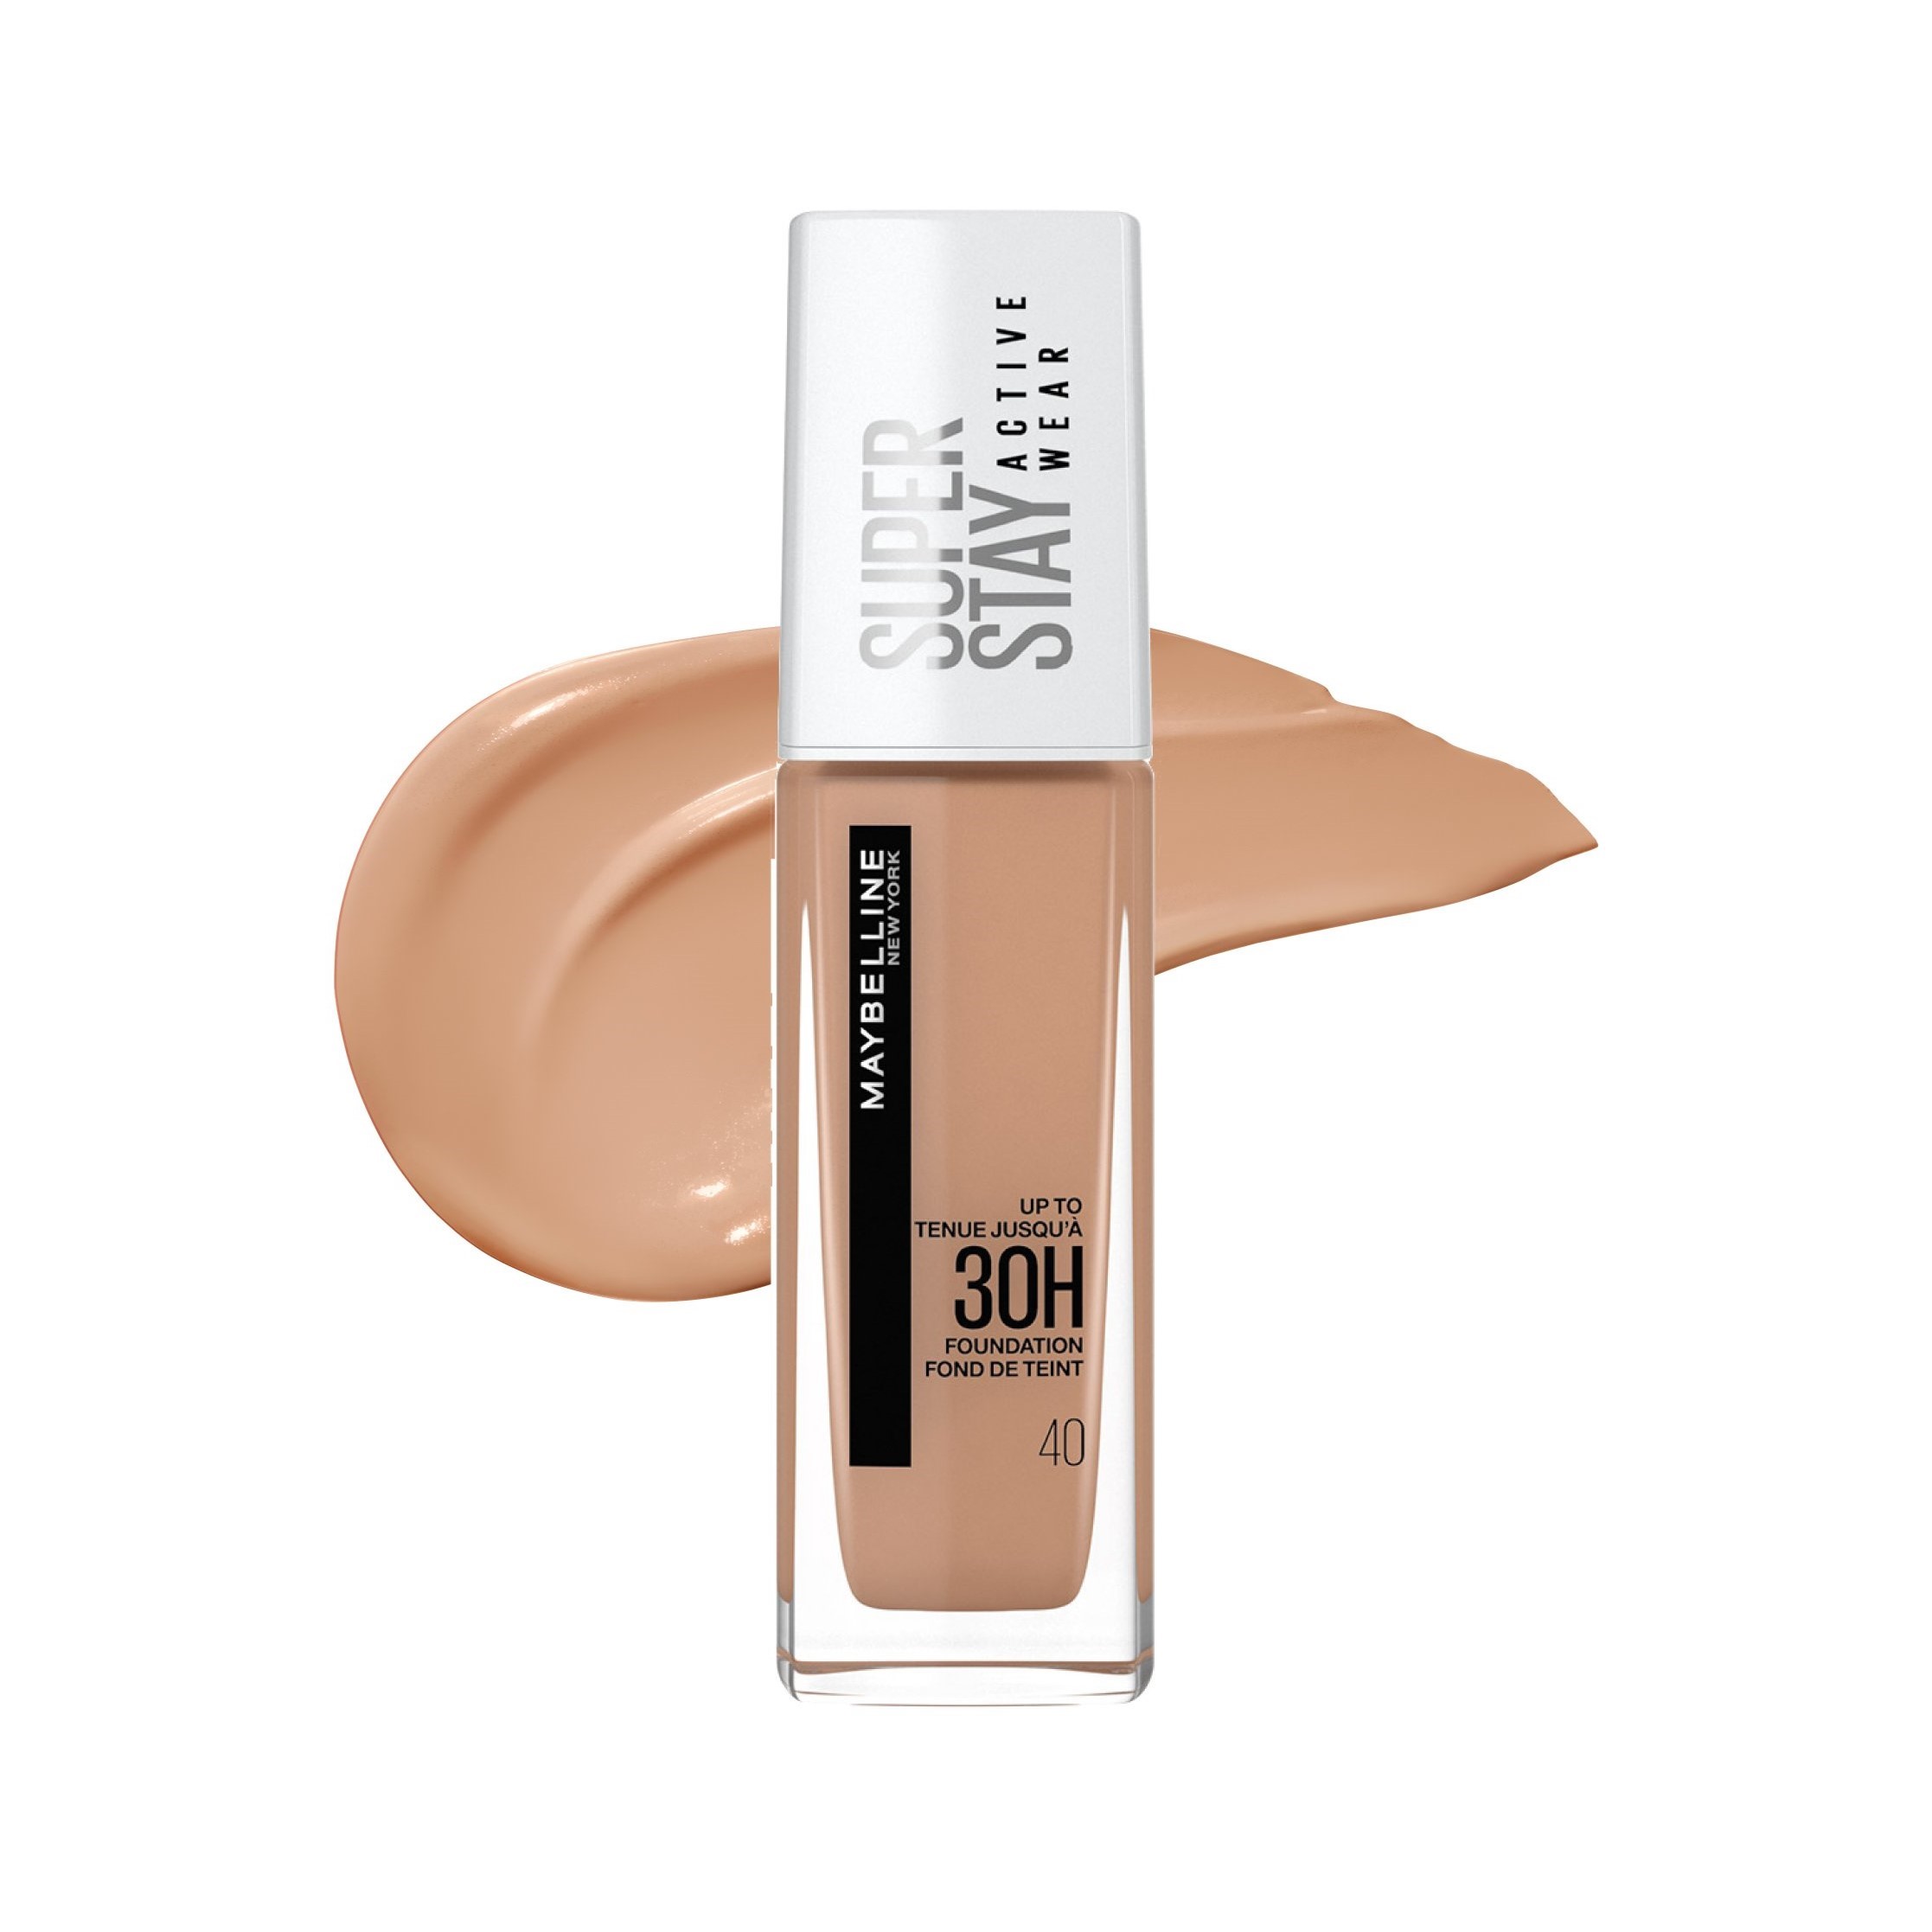 Maybelline - Foundation - Cashmere SuperStay Fawn Wear Cosmetics 40: Active - 30H